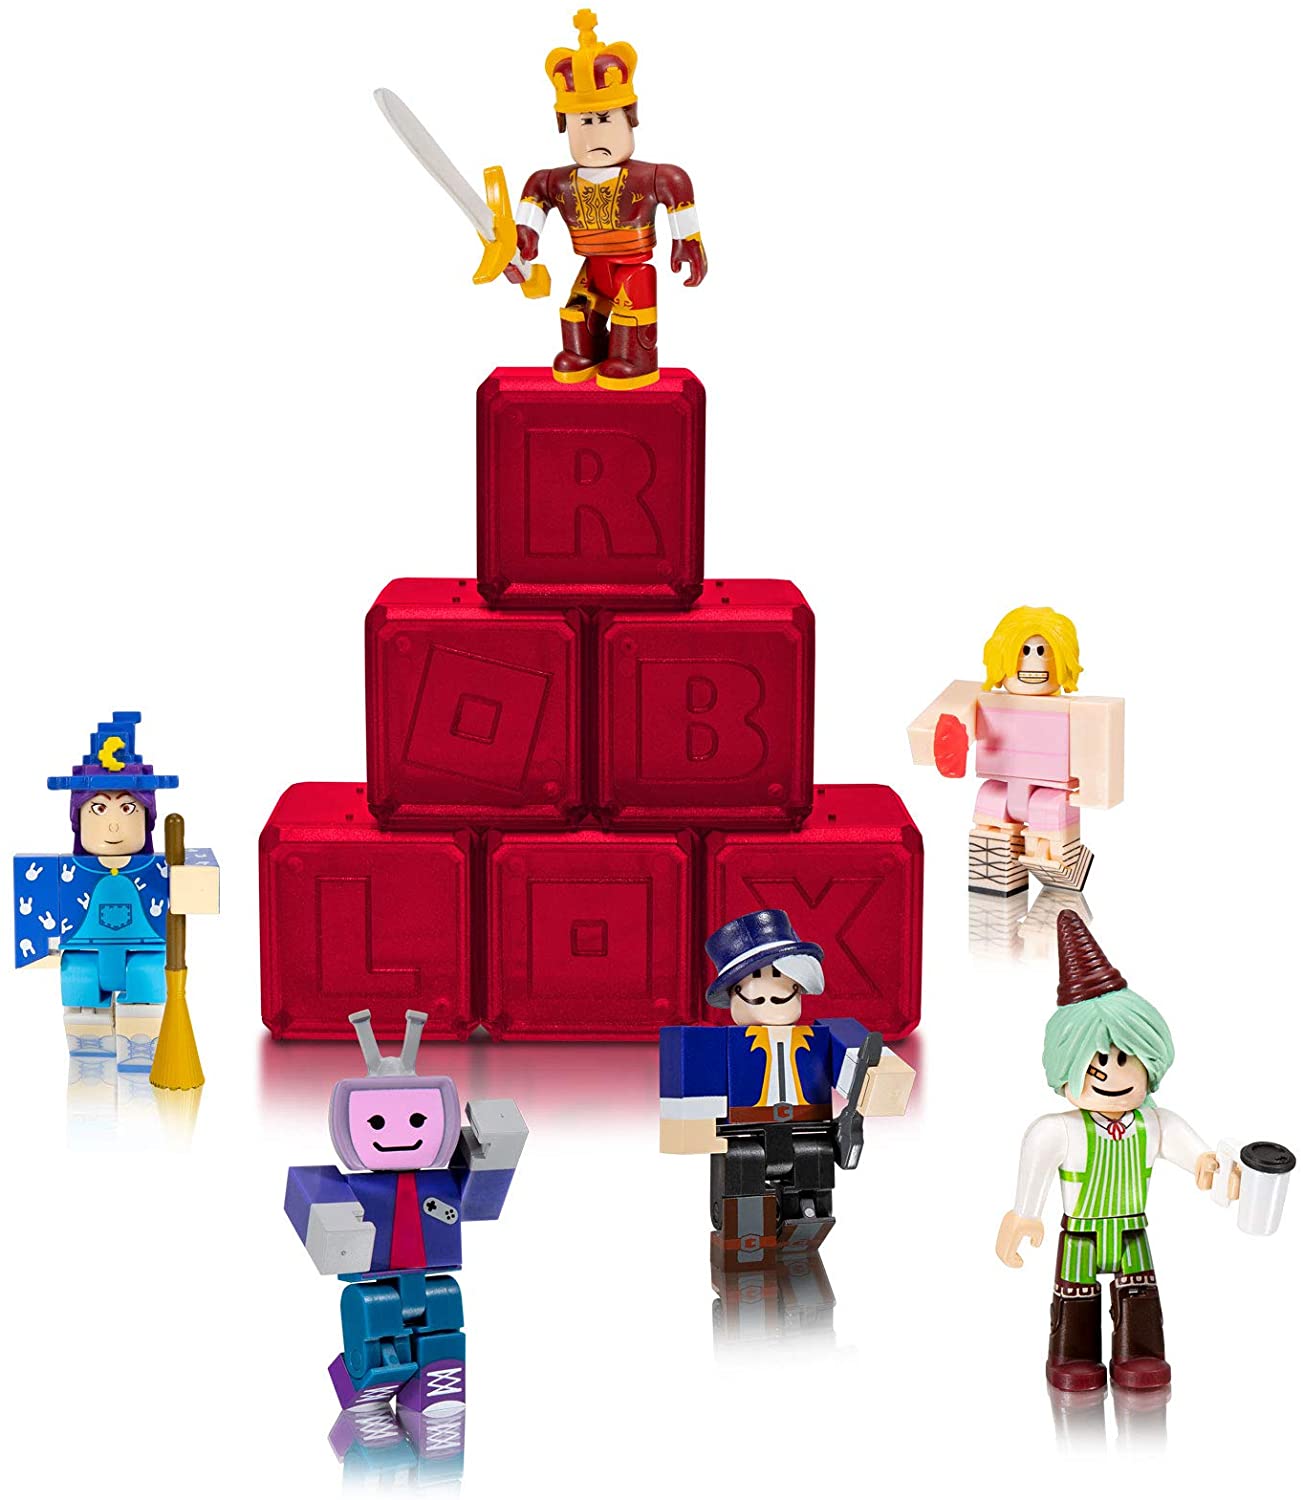 Roblox Celebrity Series 5 Mystery Box Toy Code Sky Toy Box - roblox code of toys